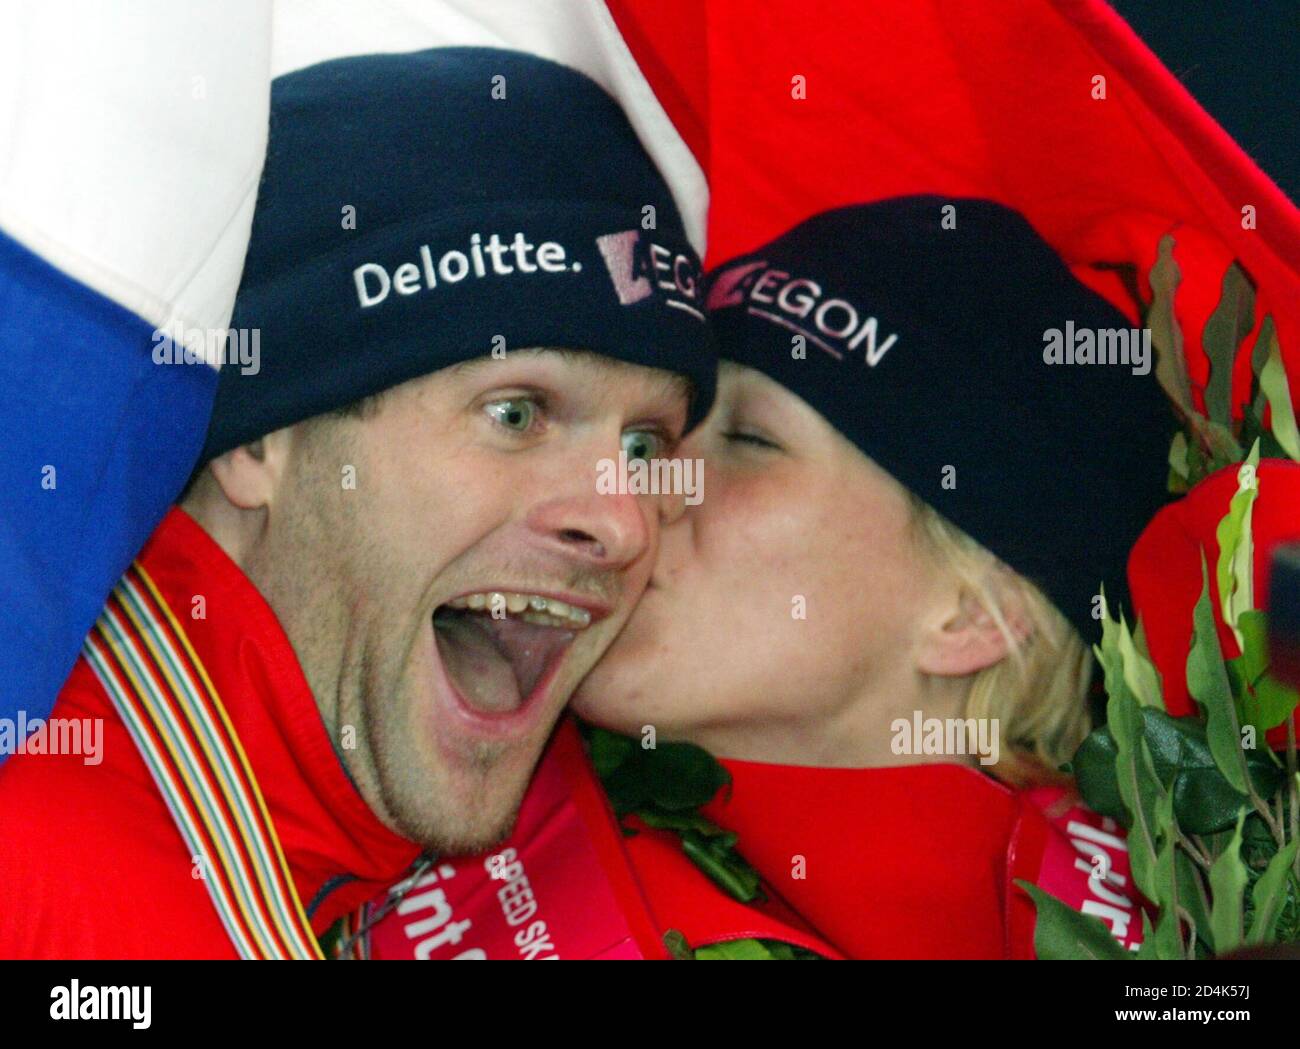 Erben Wennemars (L) of the Netherlands gets a congratulatory kiss from  compatriot Marianne Timmer as they celebrate capturing their first titles  at the World Sprint Skating Championship in Nagano, central Japan January